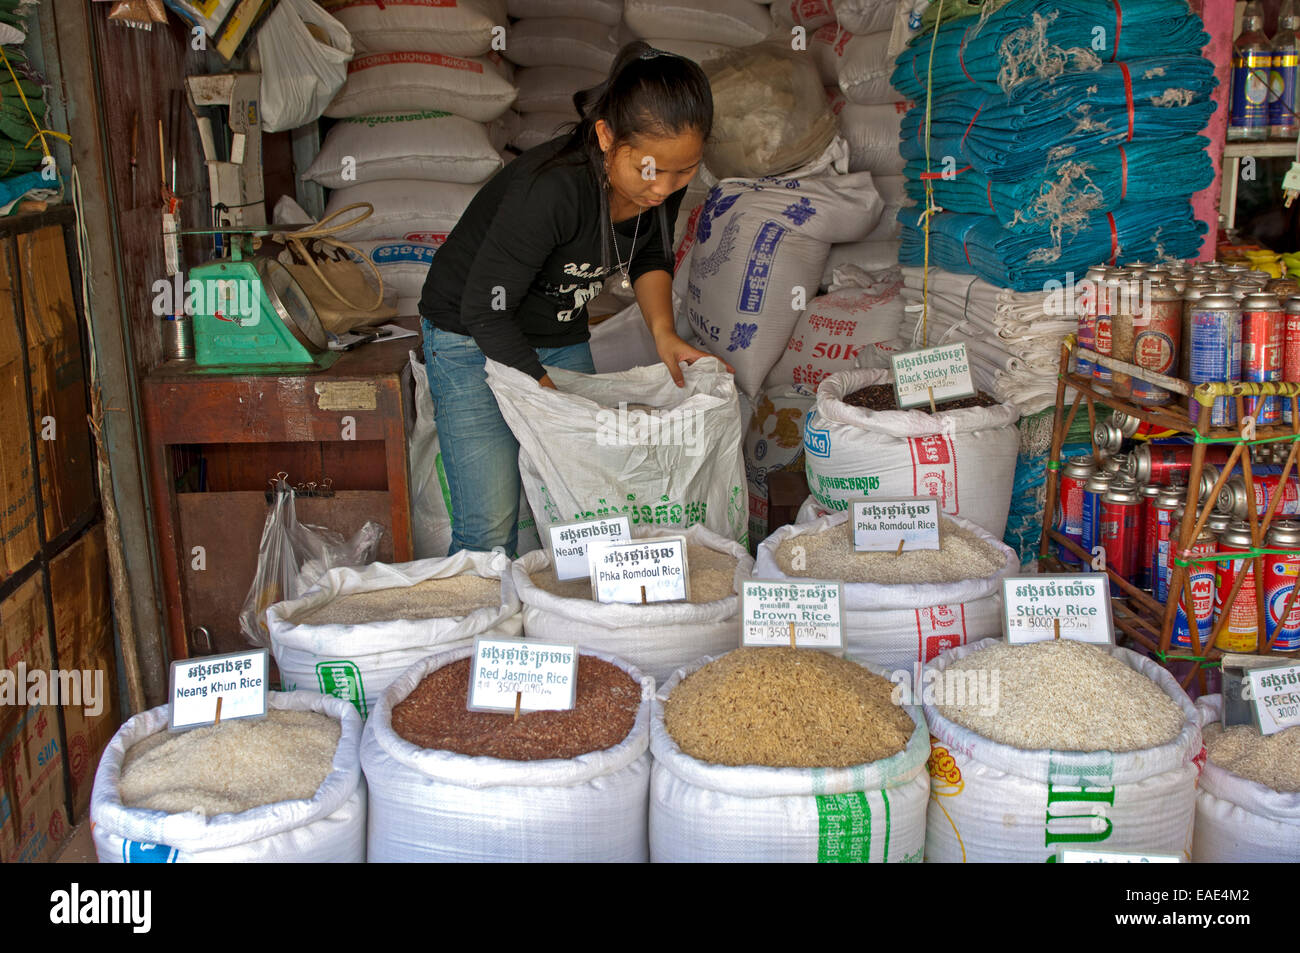 Rice vendor offering different varieties of rice at their stand, Siem Reap, Siem Reap Province, Cambodia Stock Photo